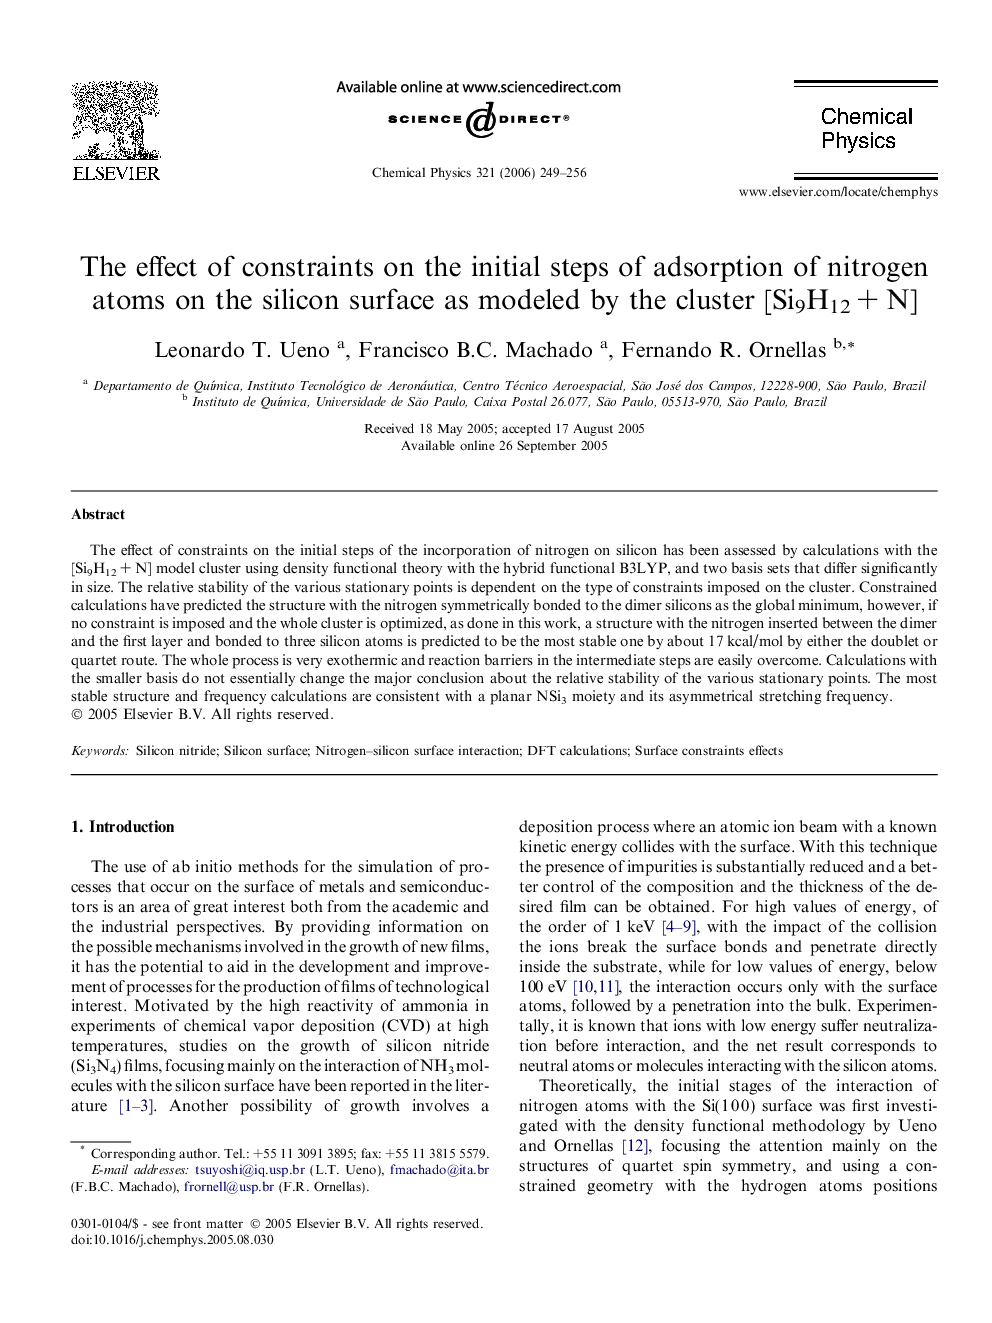 The effect of constraints on the initial steps of adsorption of nitrogen atoms on the silicon surface as modeled by the cluster [Si9H12Â +Â N]